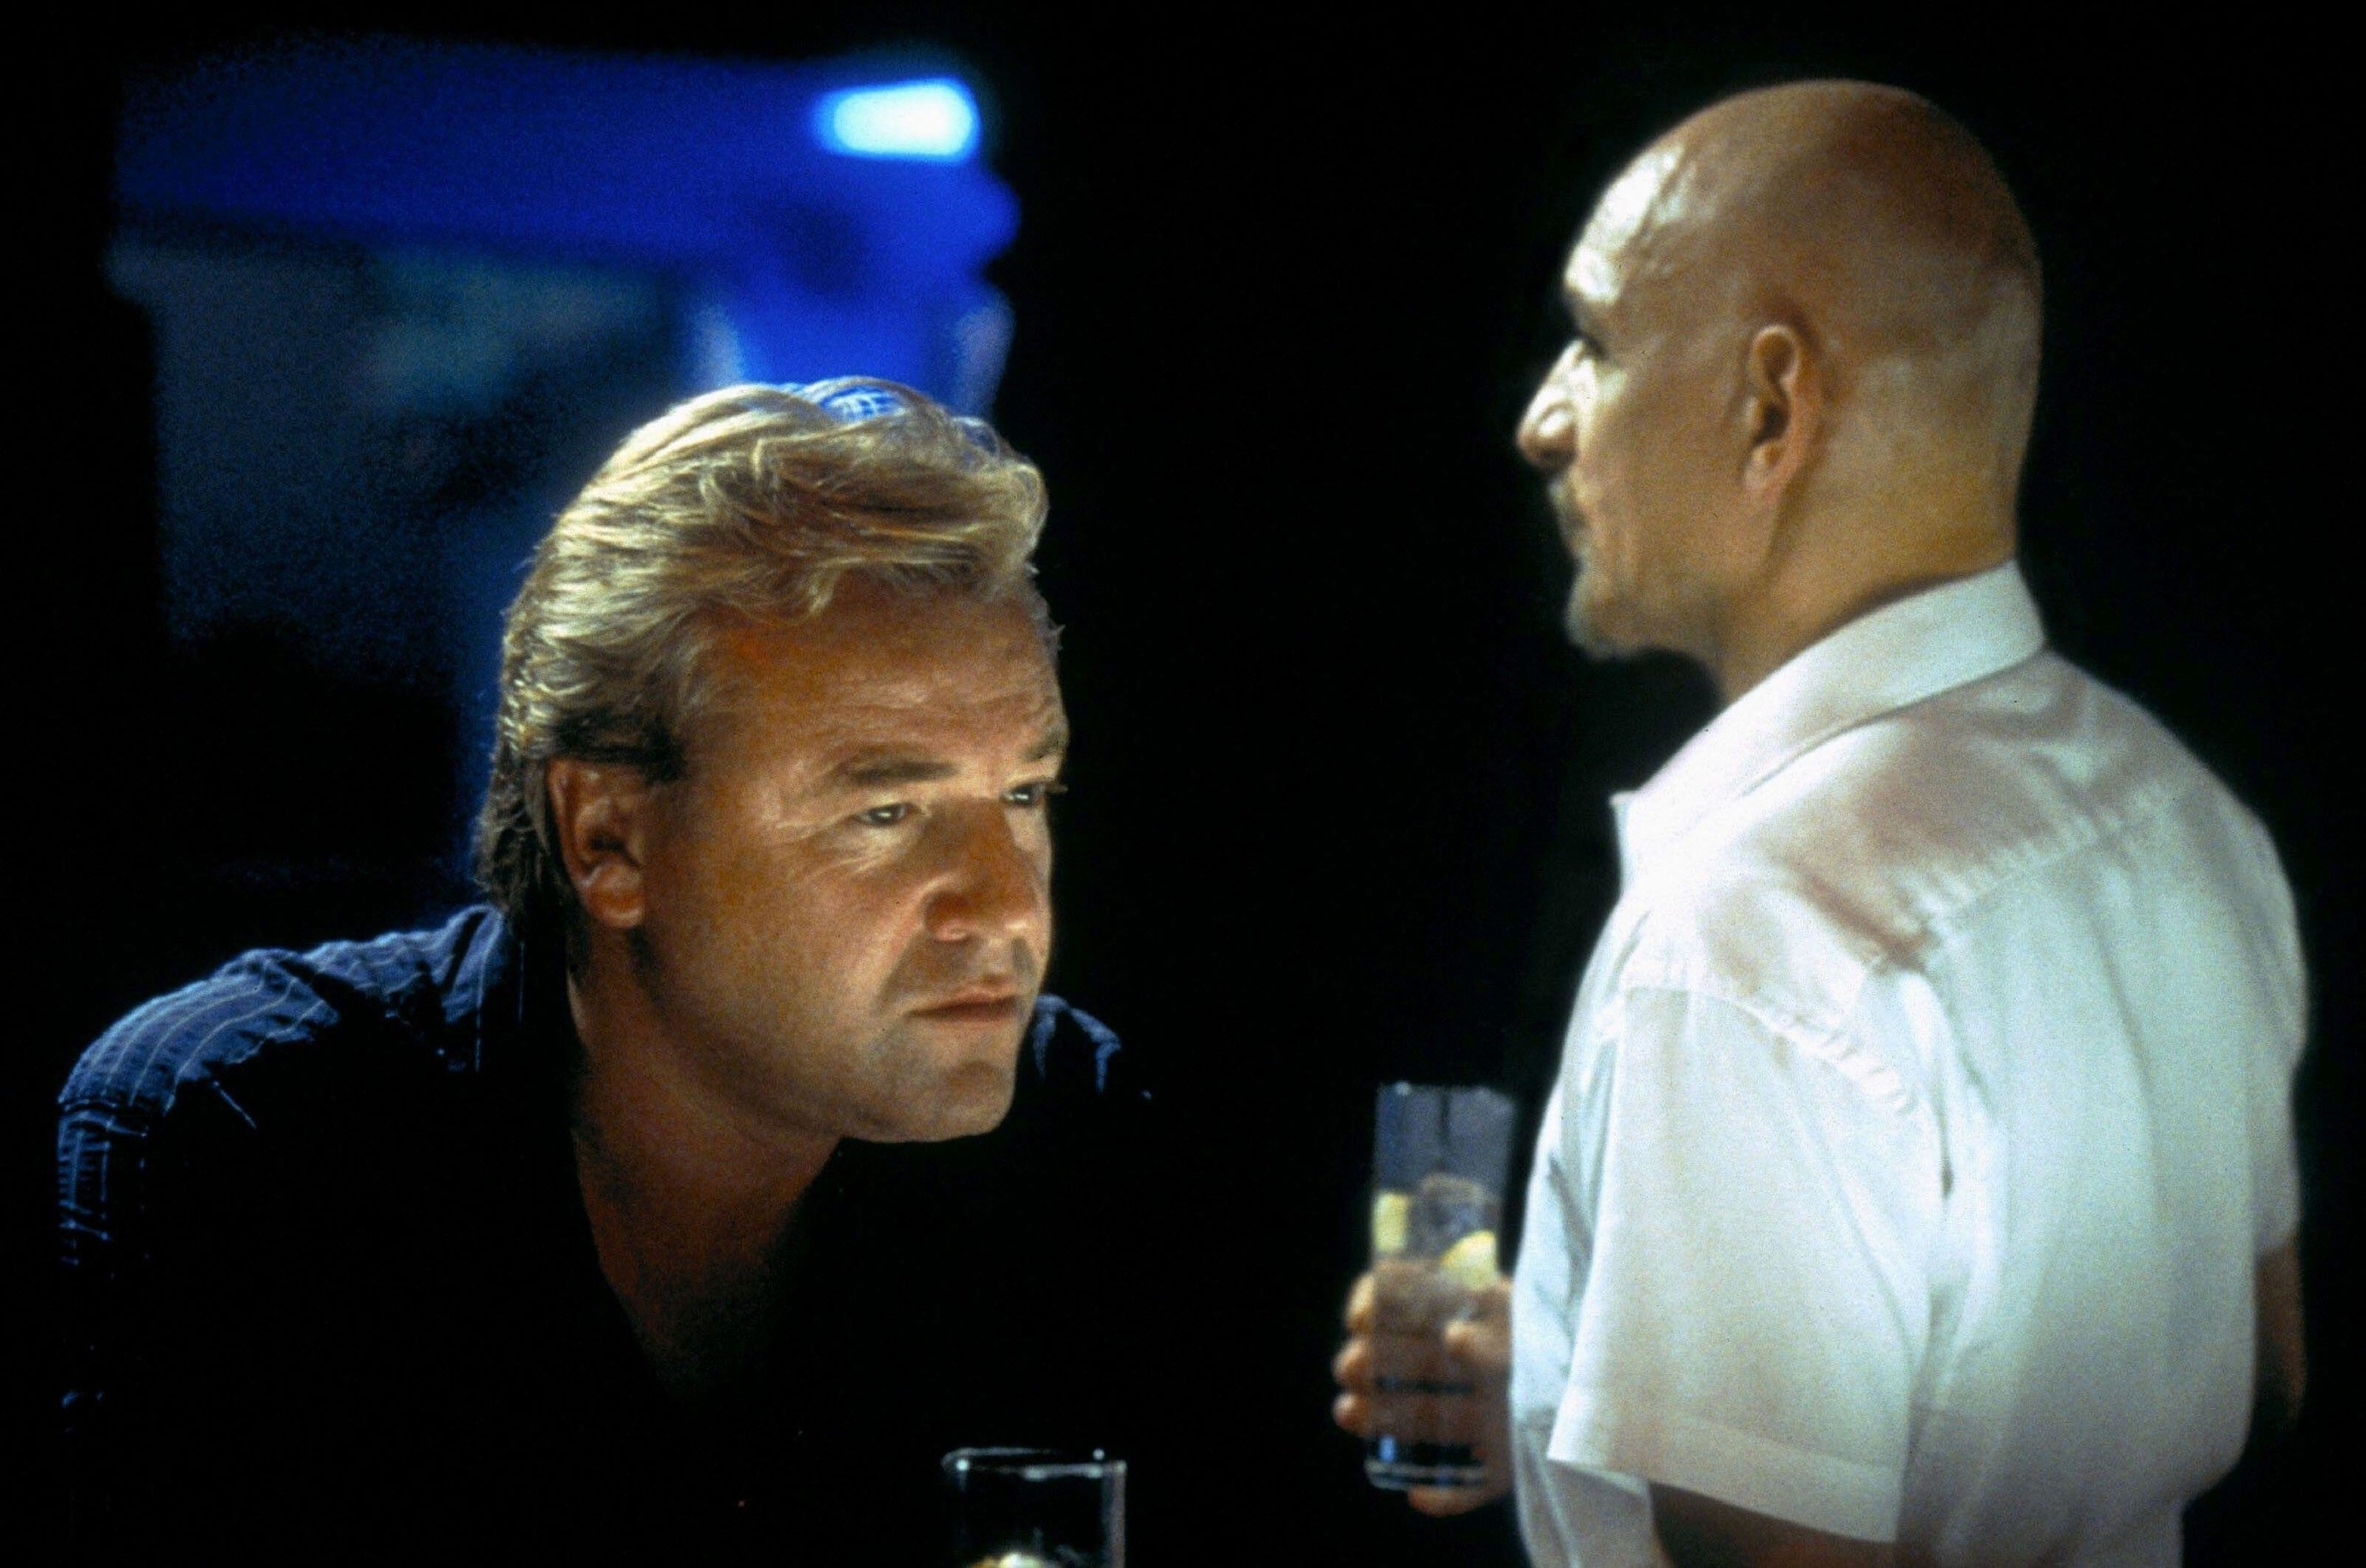 A blonde man in a dark shirt shares a drink with a bald man in a white shirt